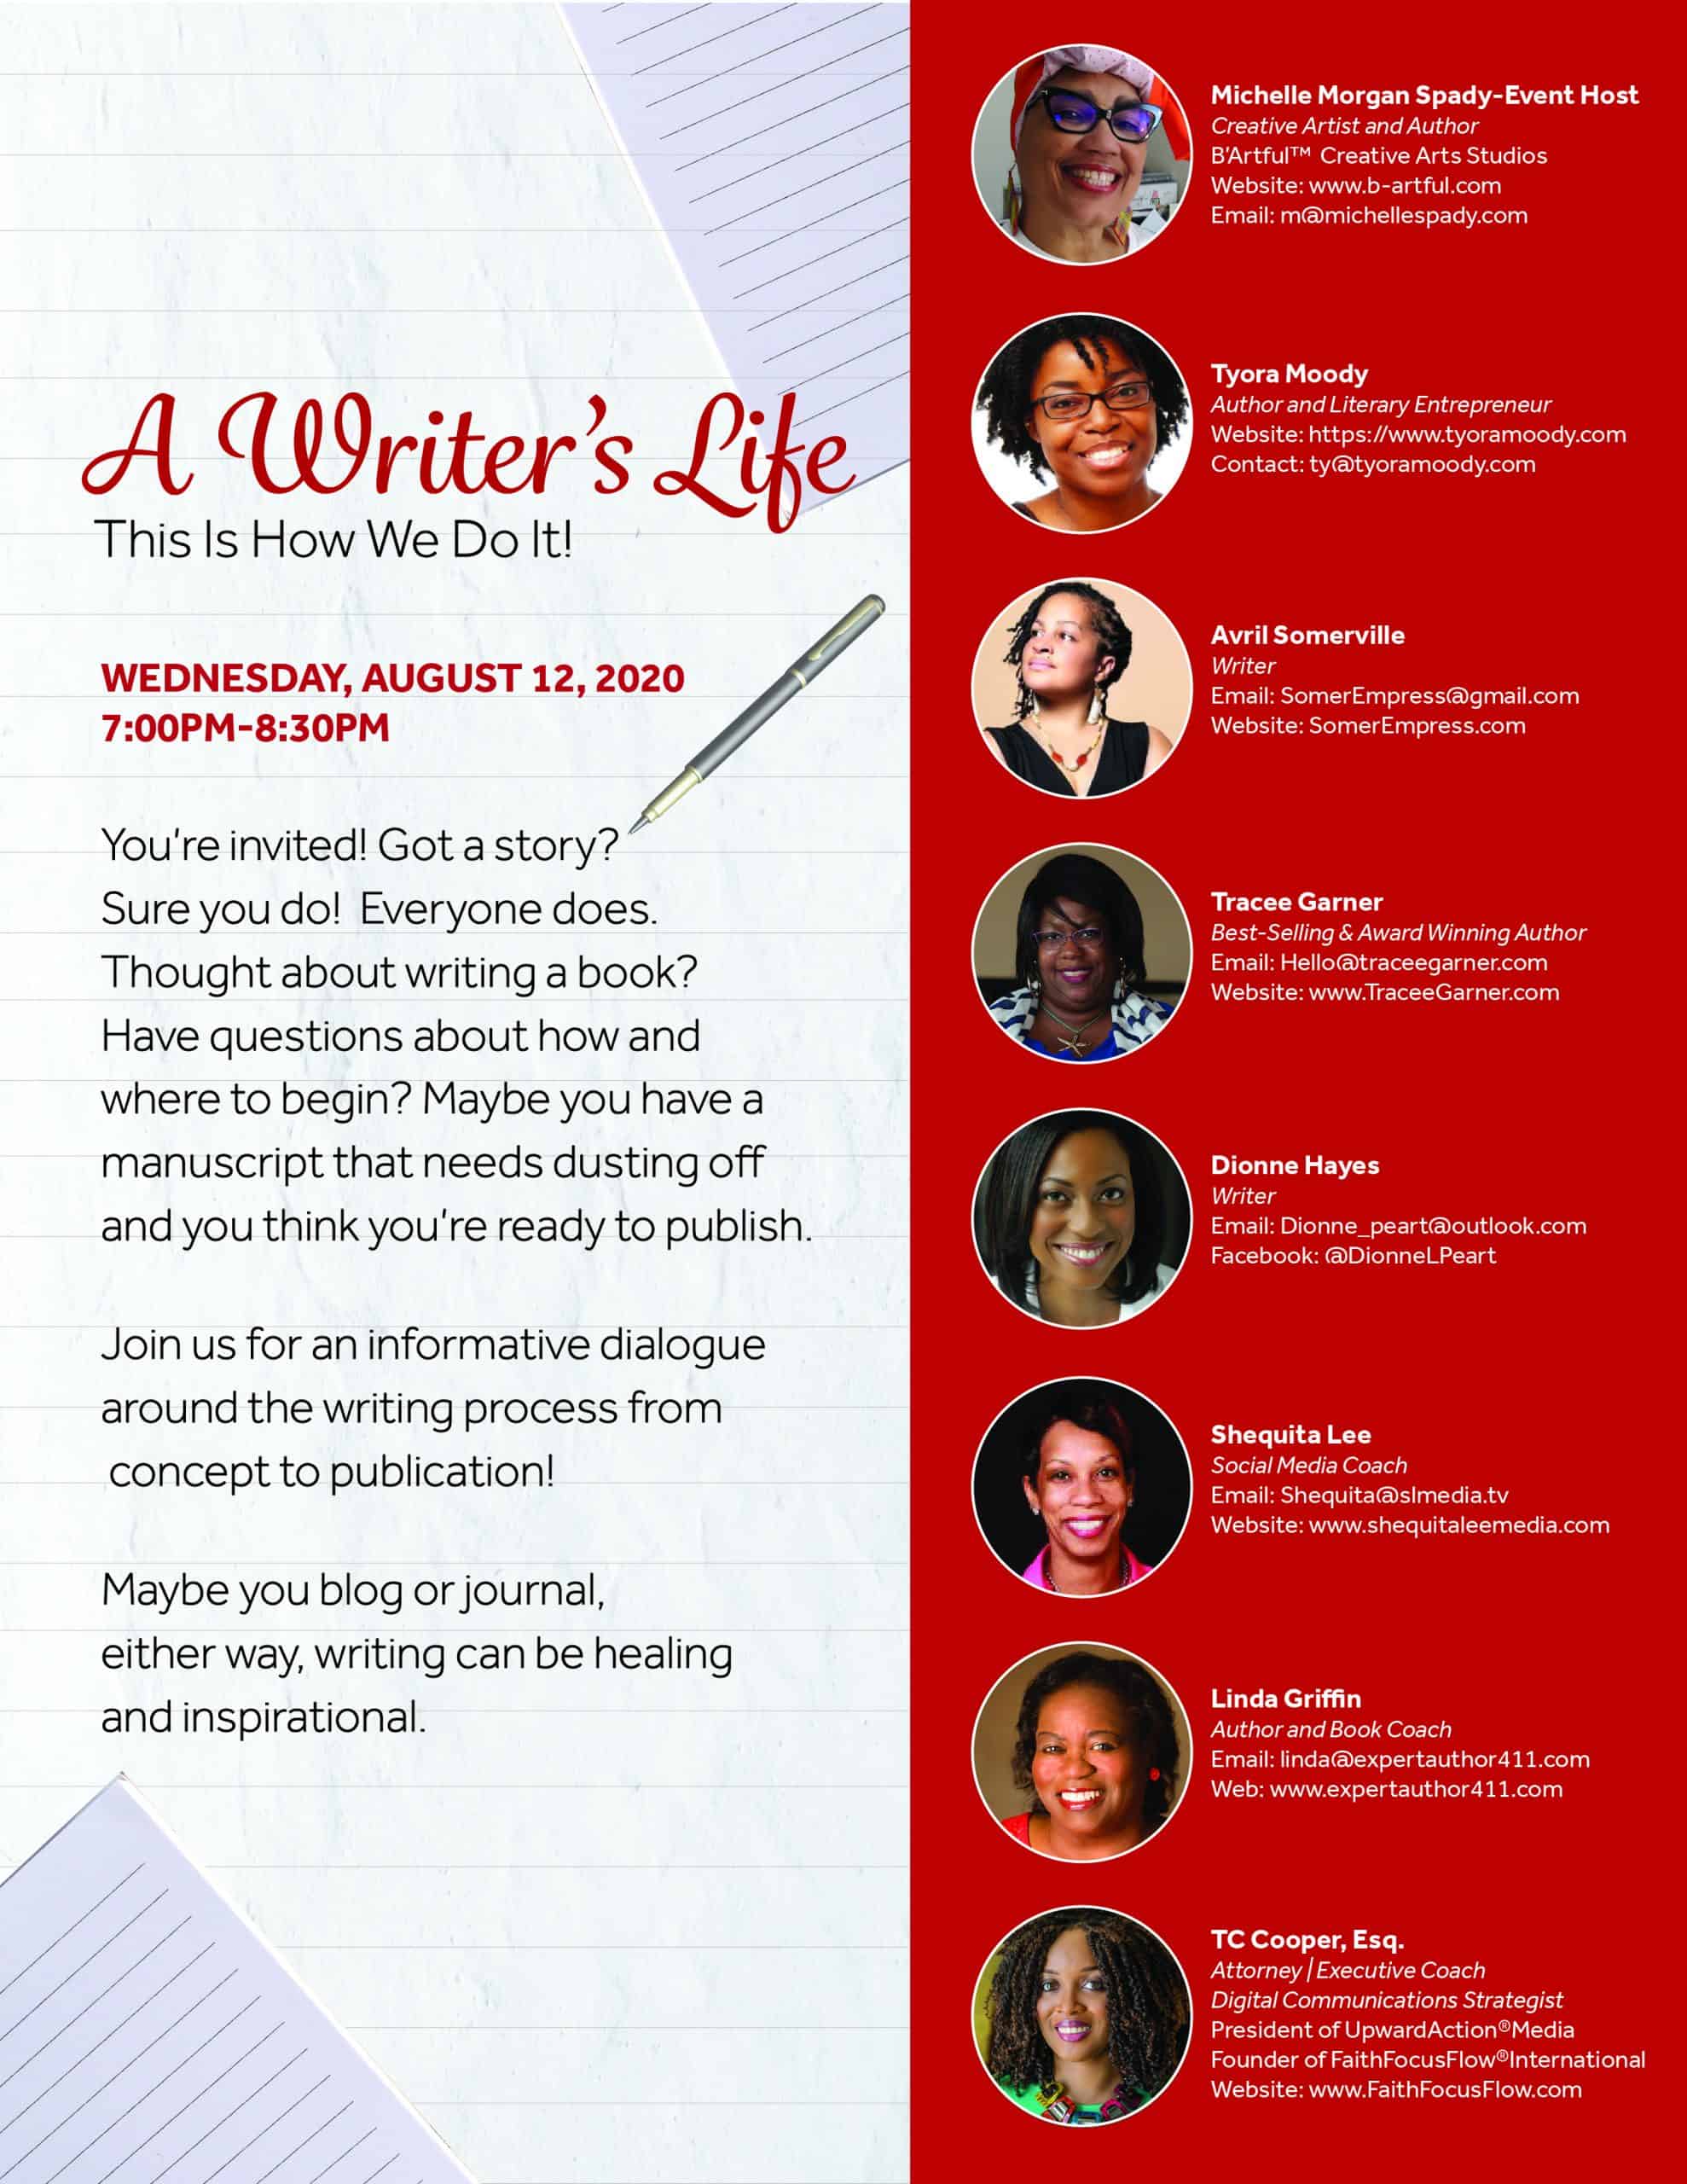 Recording | “A Writer’s Life: This Is How We Do It!” Webinar